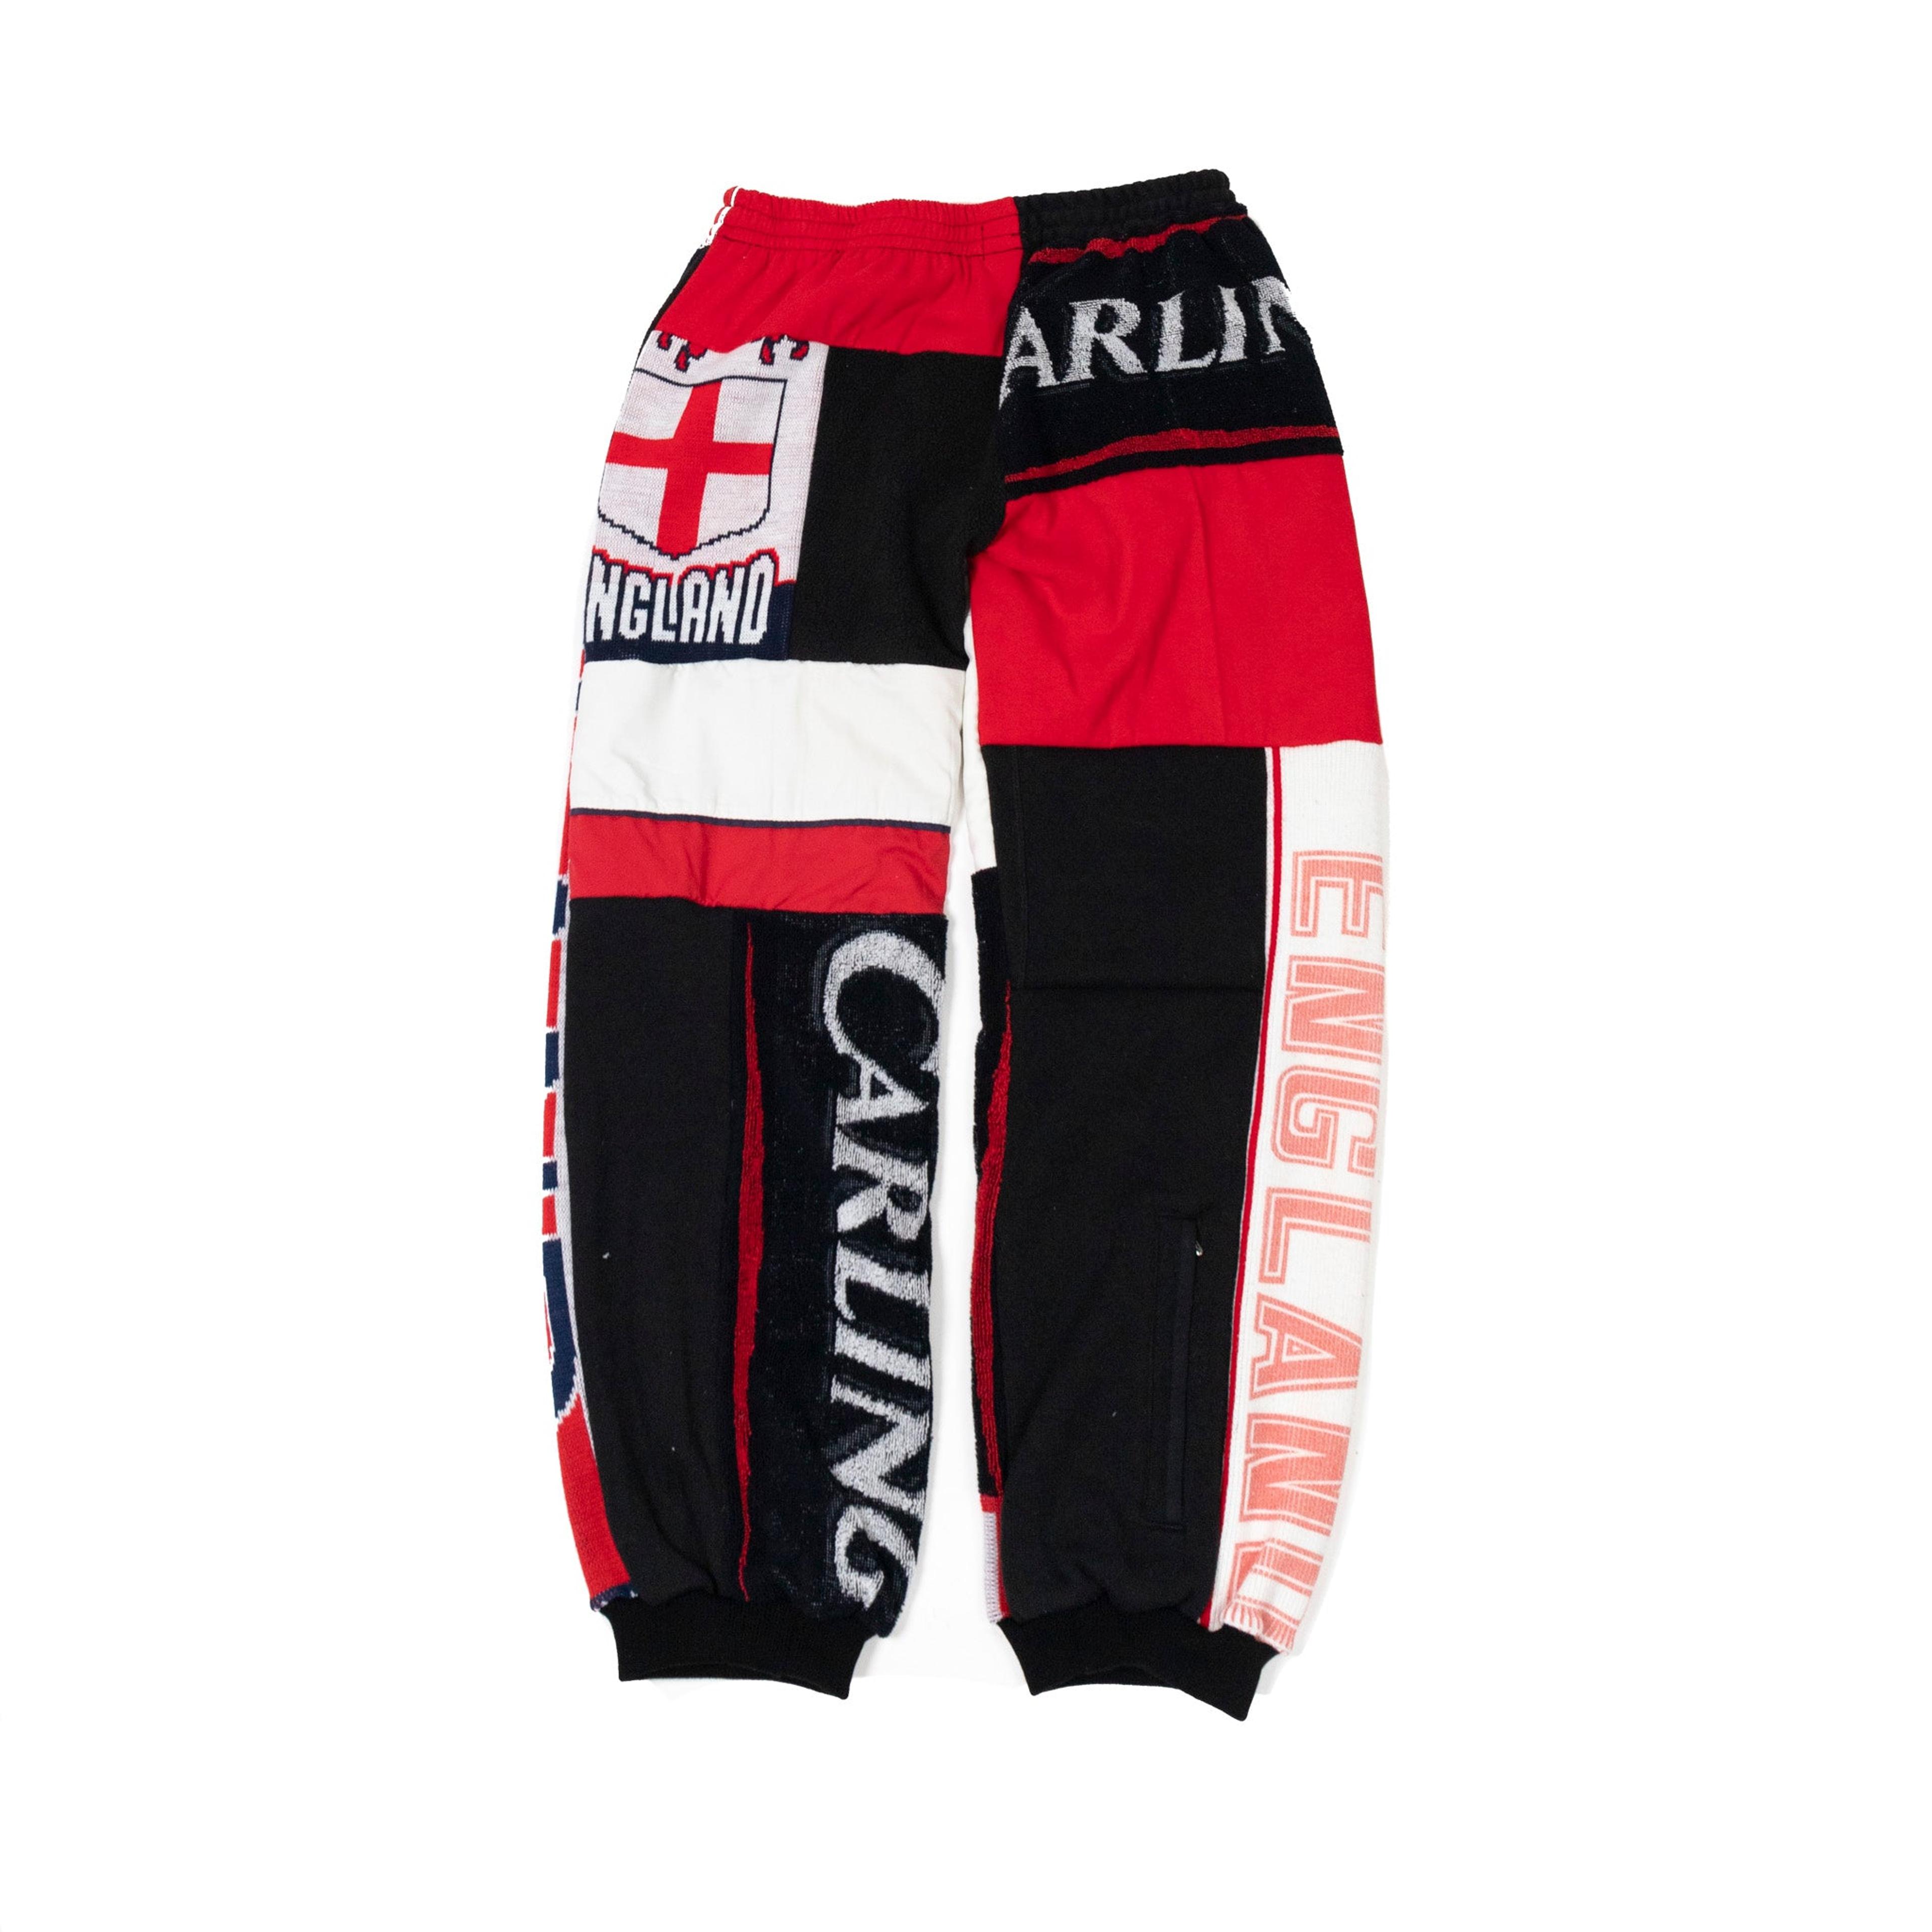 Alternate View 1 of VT Rework: The '98 England x Carling x Umbro Joggers